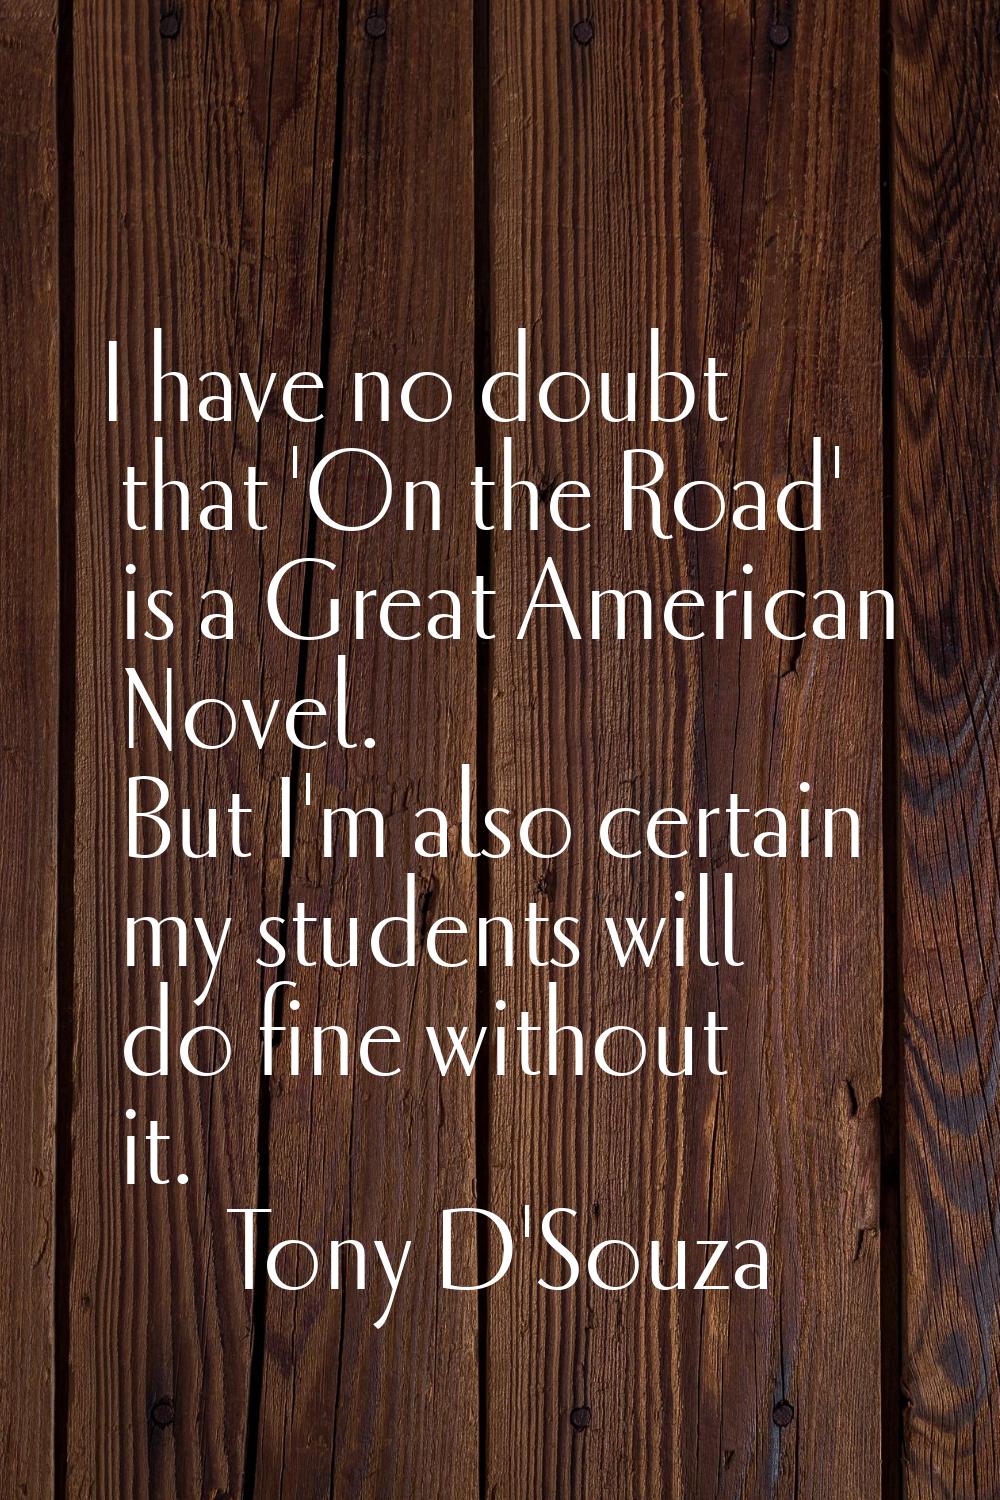 I have no doubt that 'On the Road' is a Great American Novel. But I'm also certain my students will